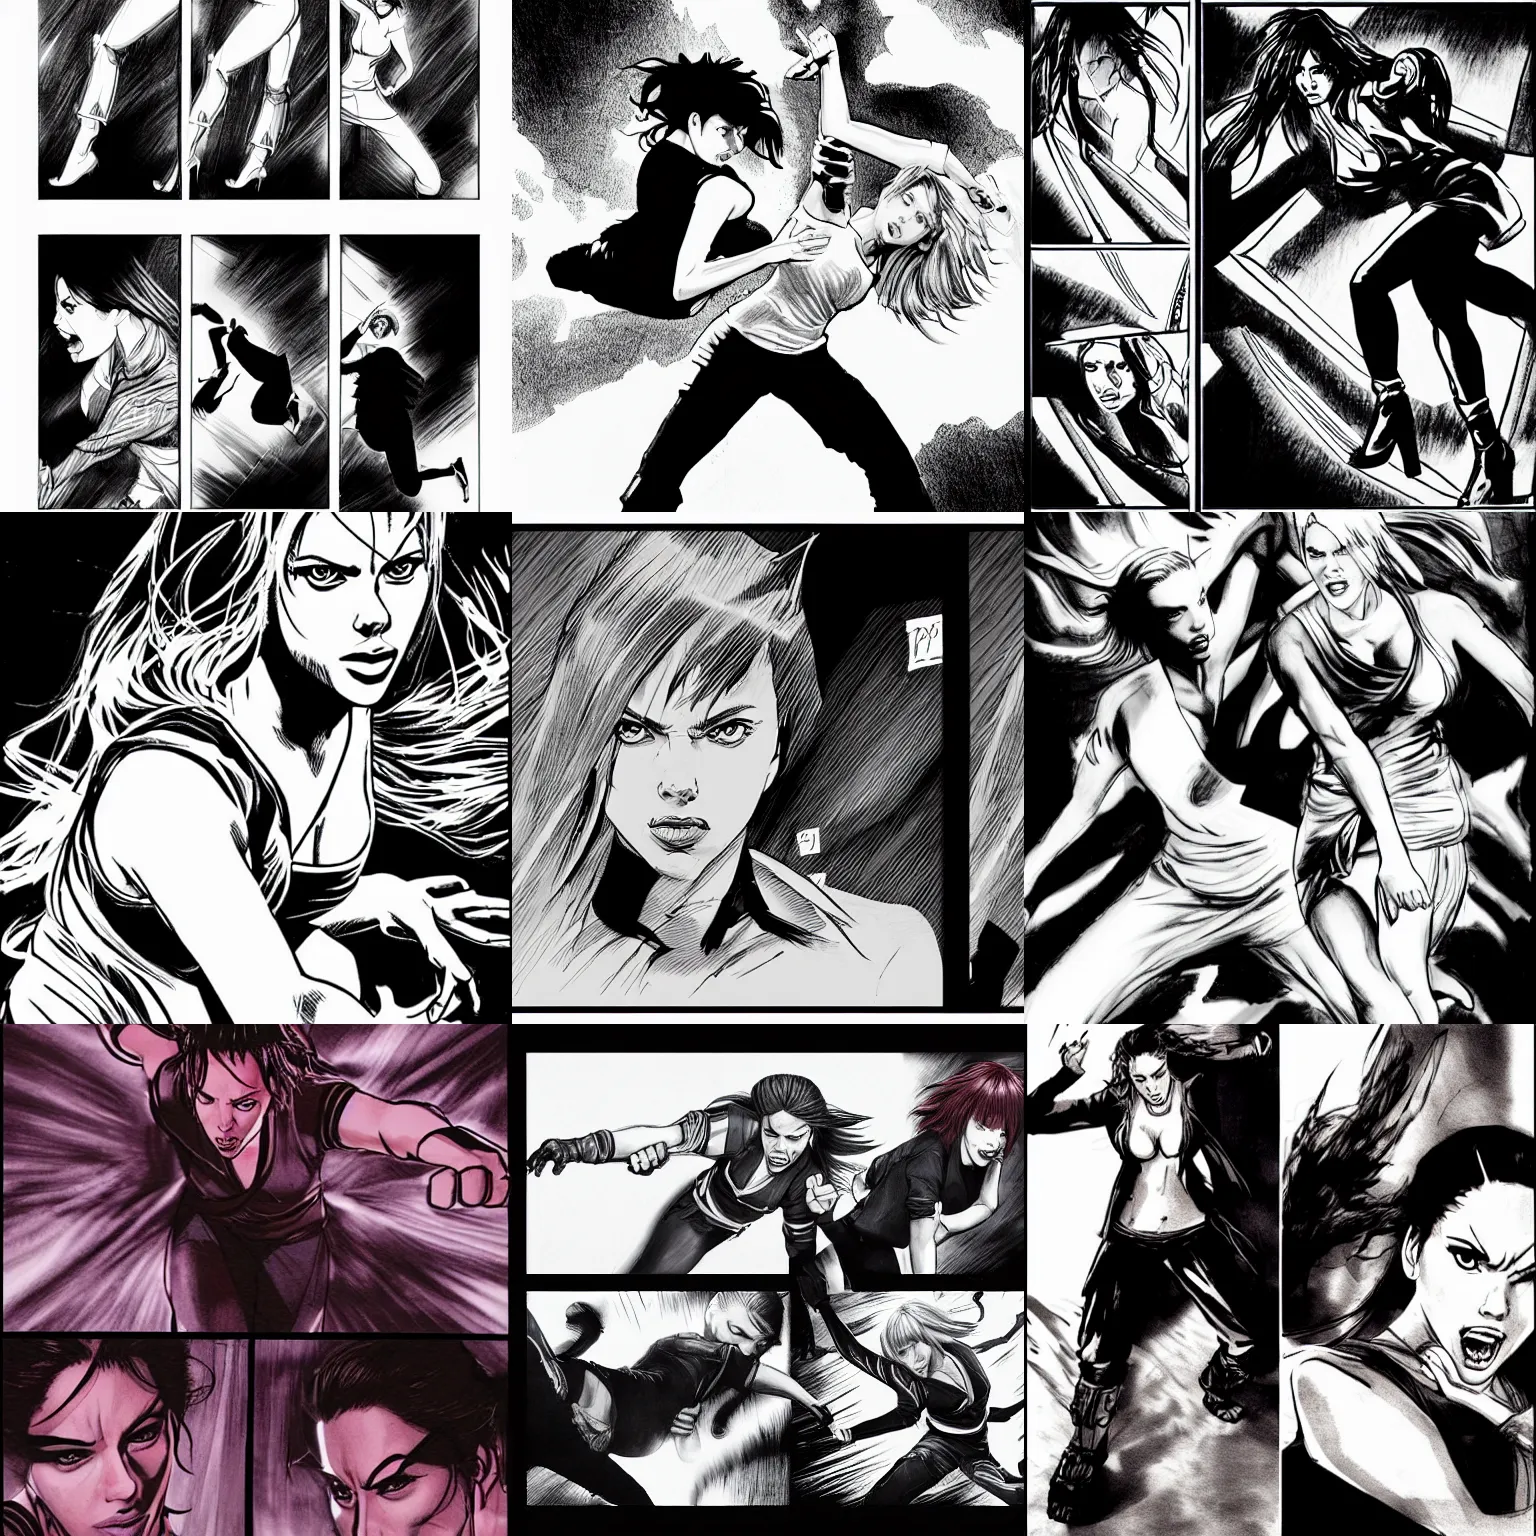 Prompt: scarlett johansson with angry expression fights halle berry, 2 comic panel flying kick battle poses. dramatic lighting, ninja scroll anime style, pencil and ink manga drawing